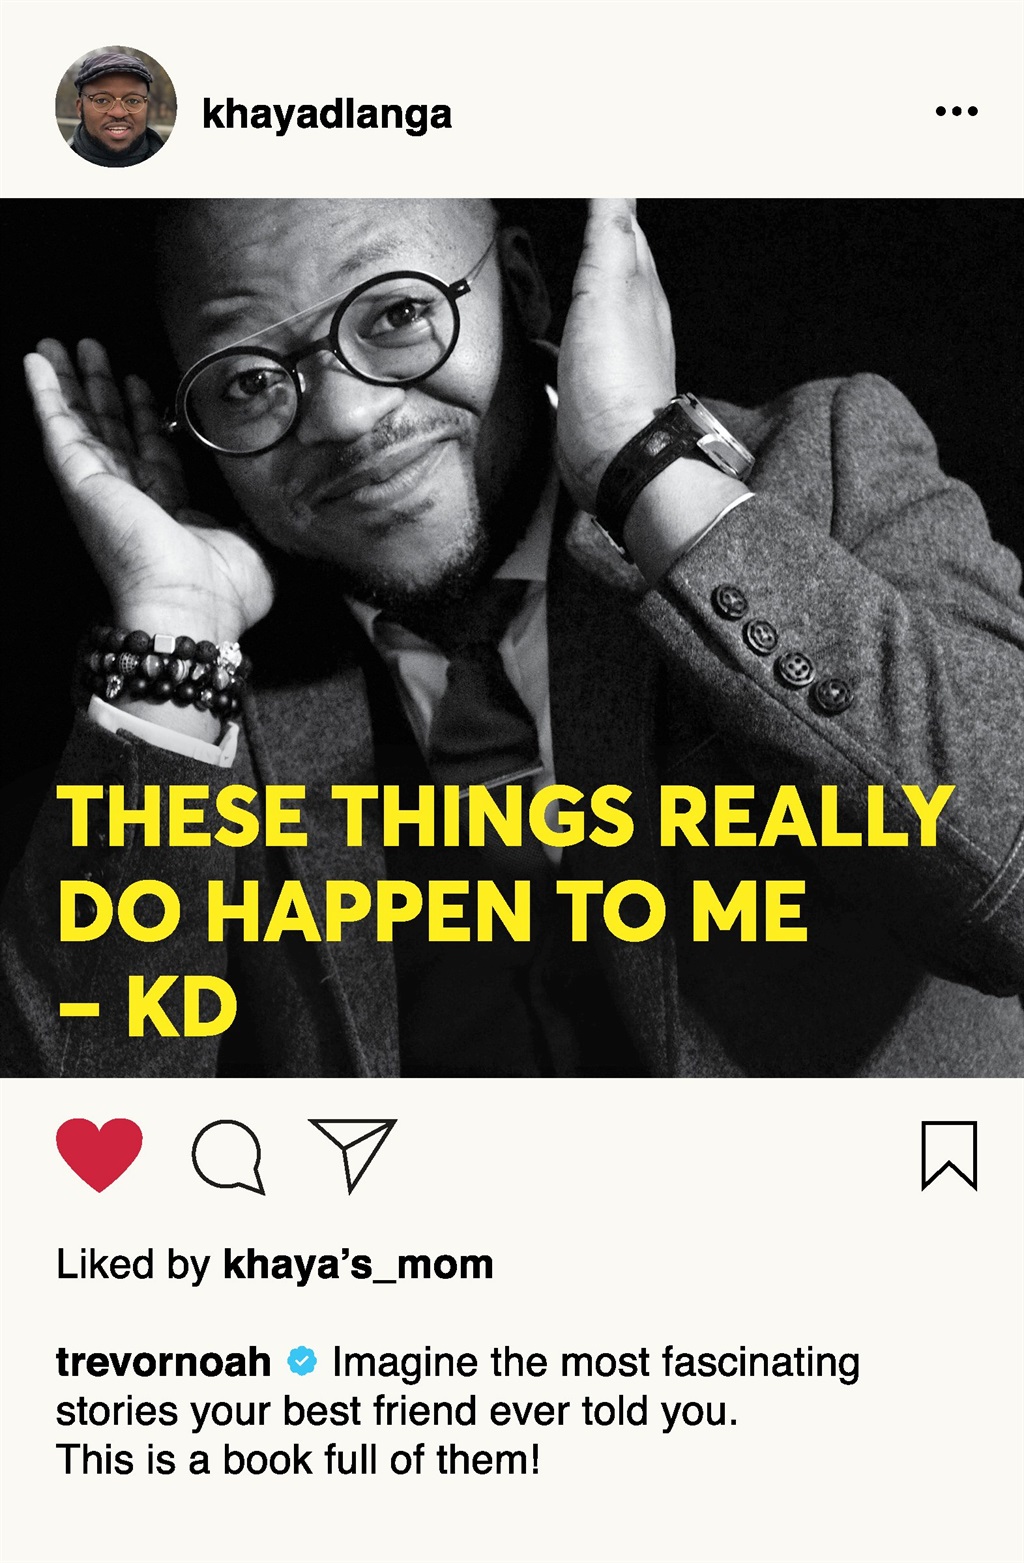 These Things Really Do Happen To Me by Khaya Dlanga is published by Pan Macmillan.